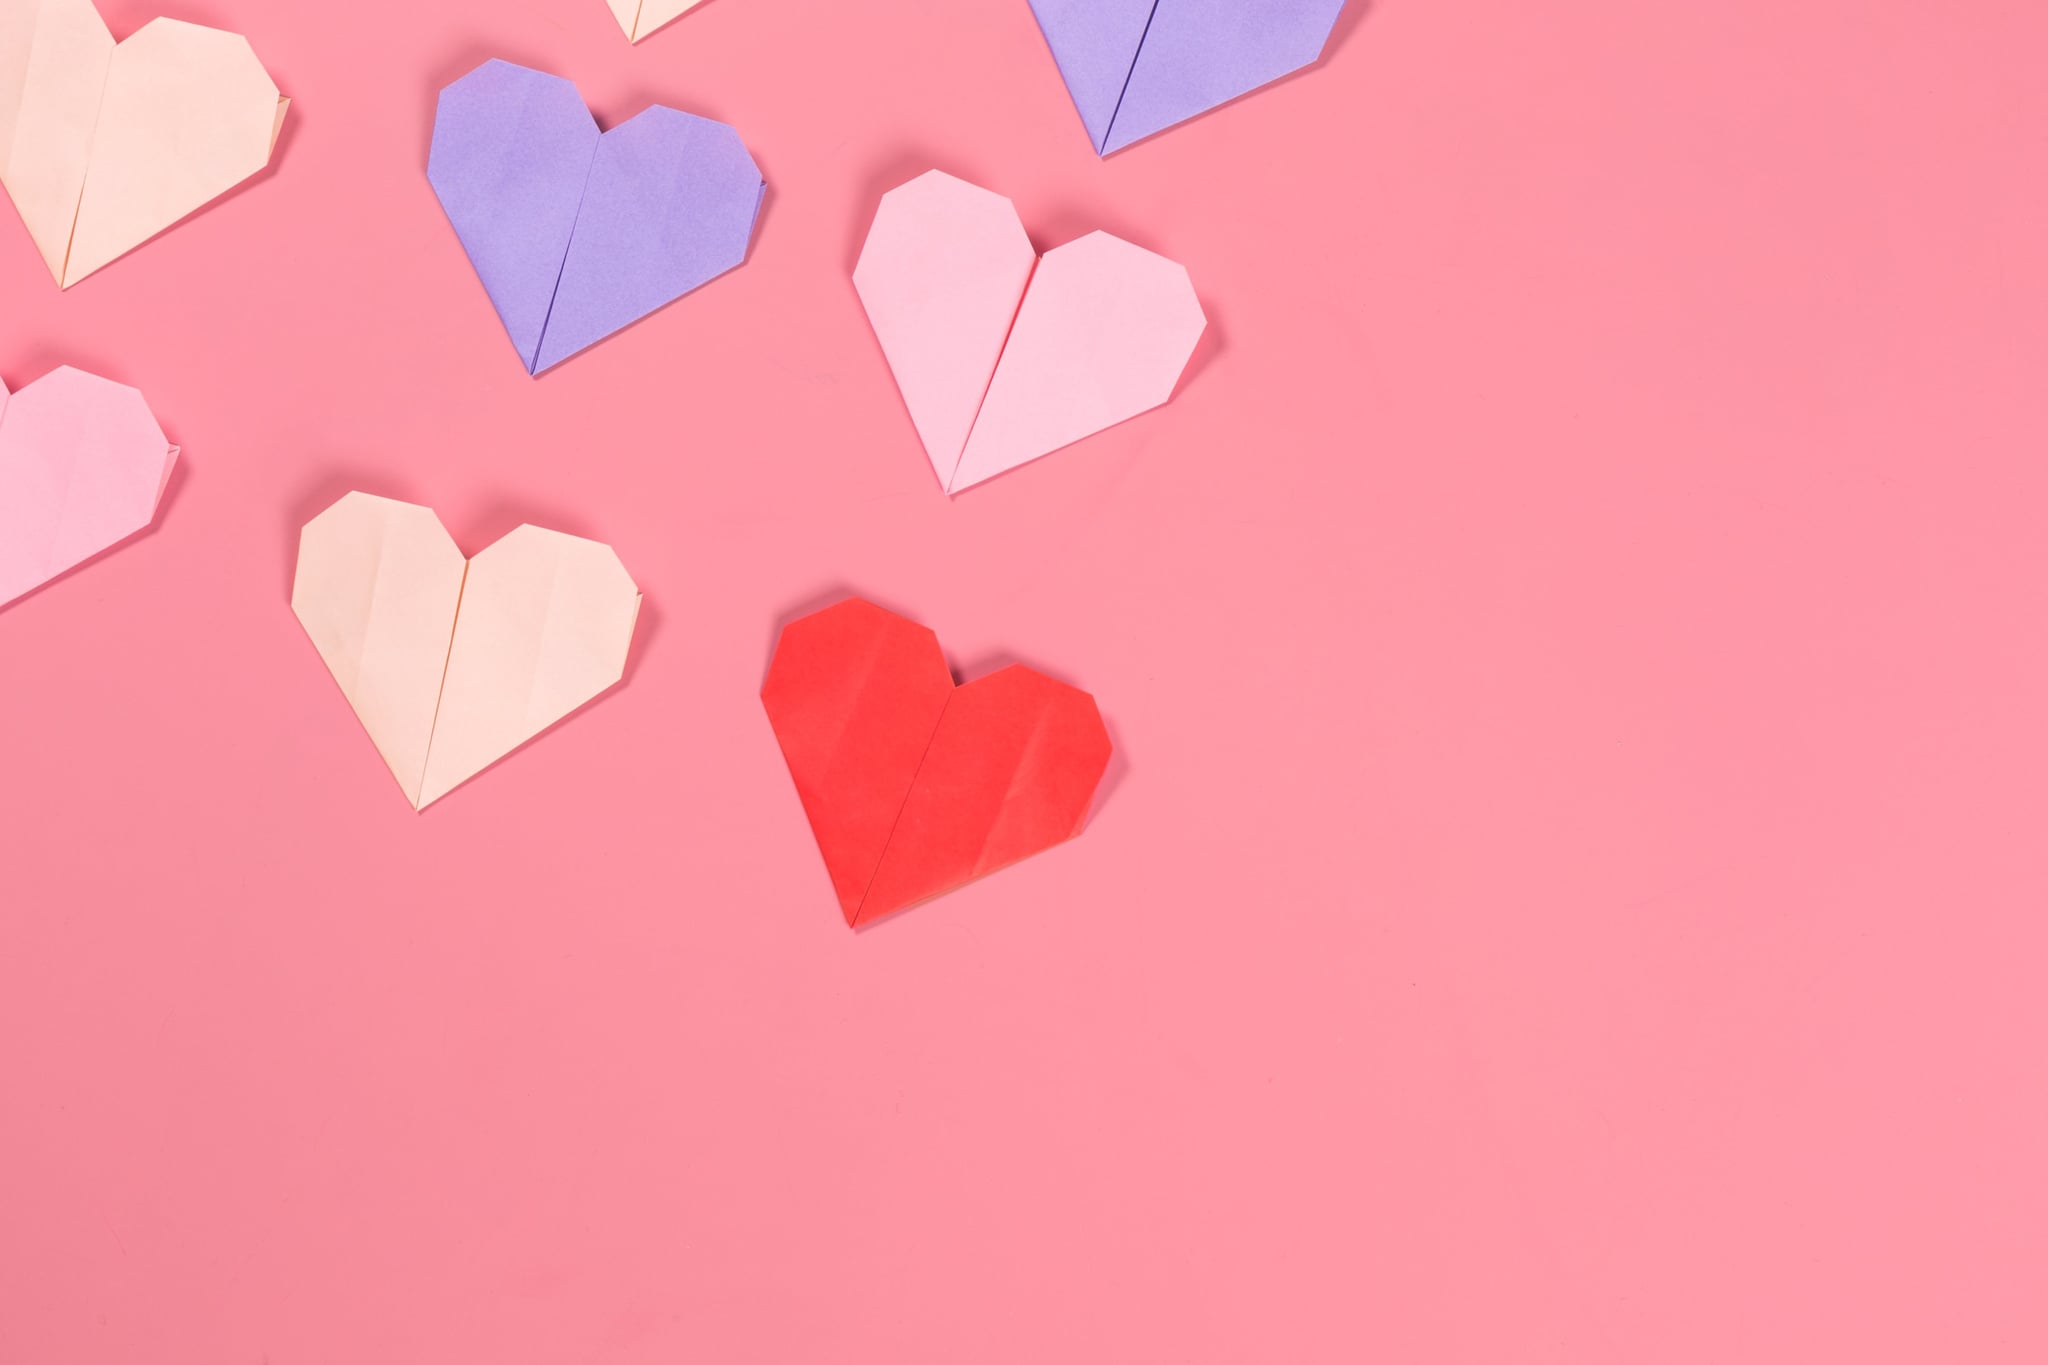 Technology & Gadgets Valentine's Day Desktop Background That Will Give You Heart Eyes